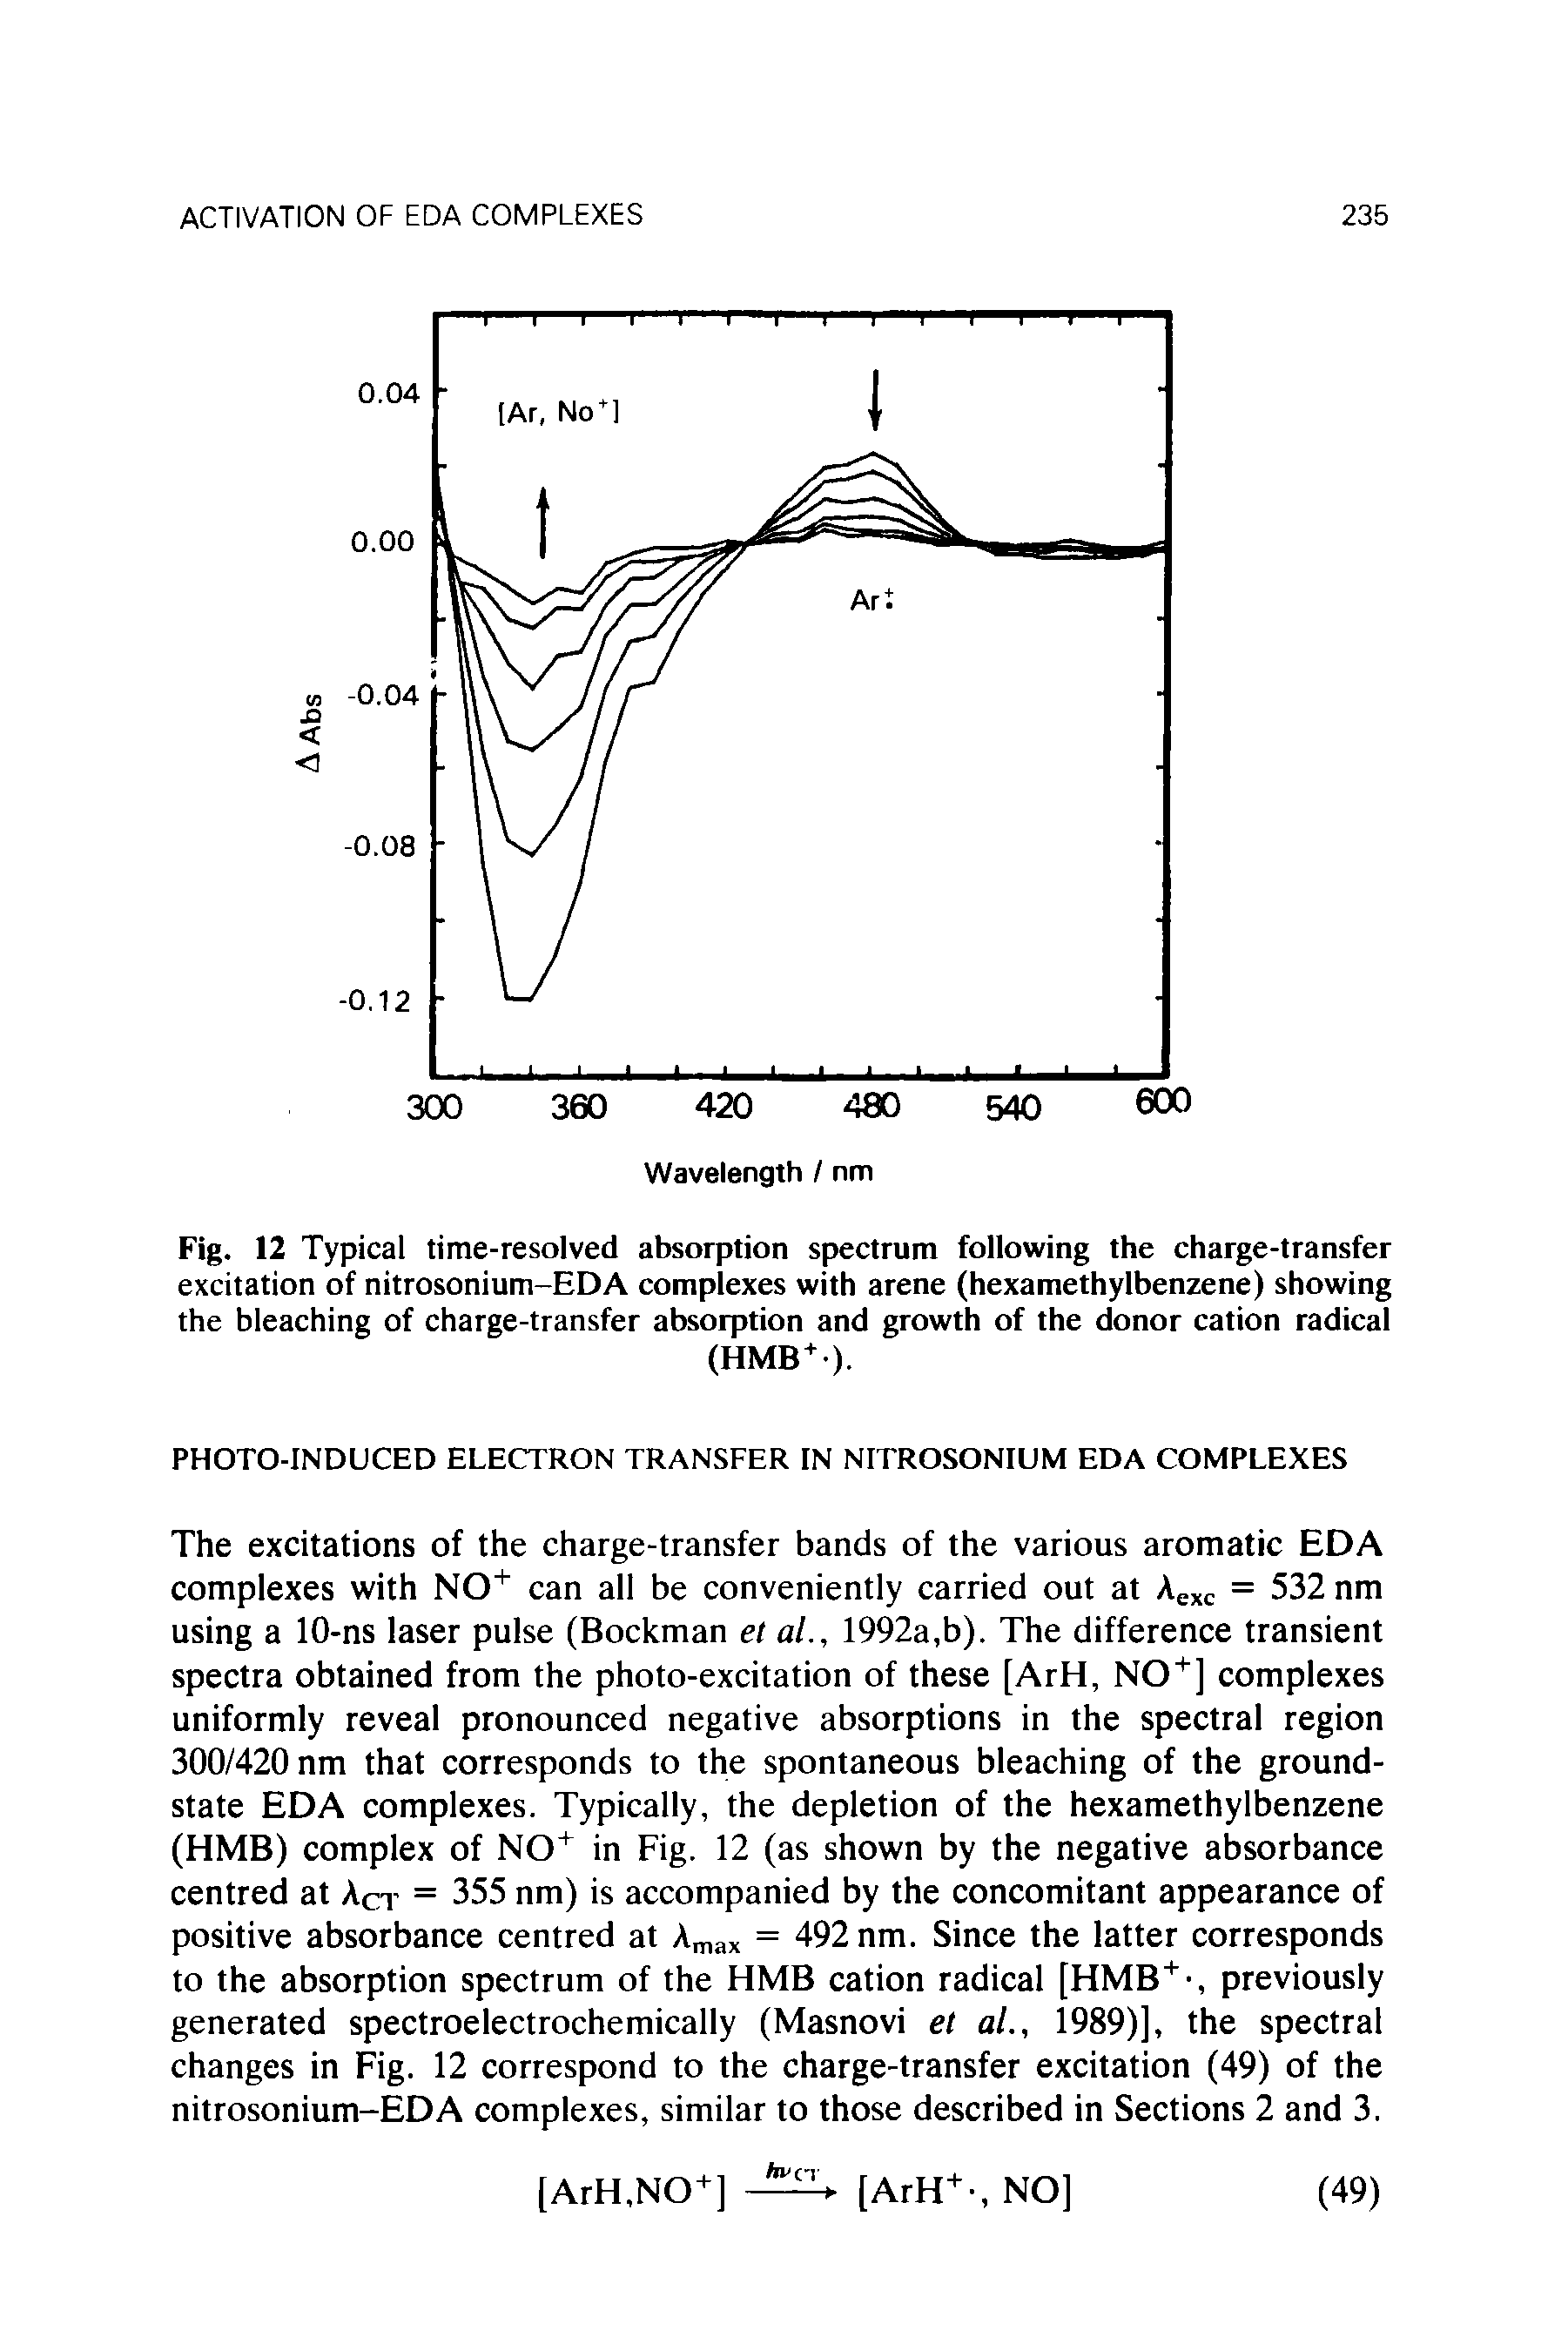 Fig. 12 Typical time-resolved absorption spectrum following the charge-transfer excitation of nitrosonium-EDA complexes with arene (hexamethylbenzene) showing the bleaching of charge-transfer absorption and growth of the donor cation radical...